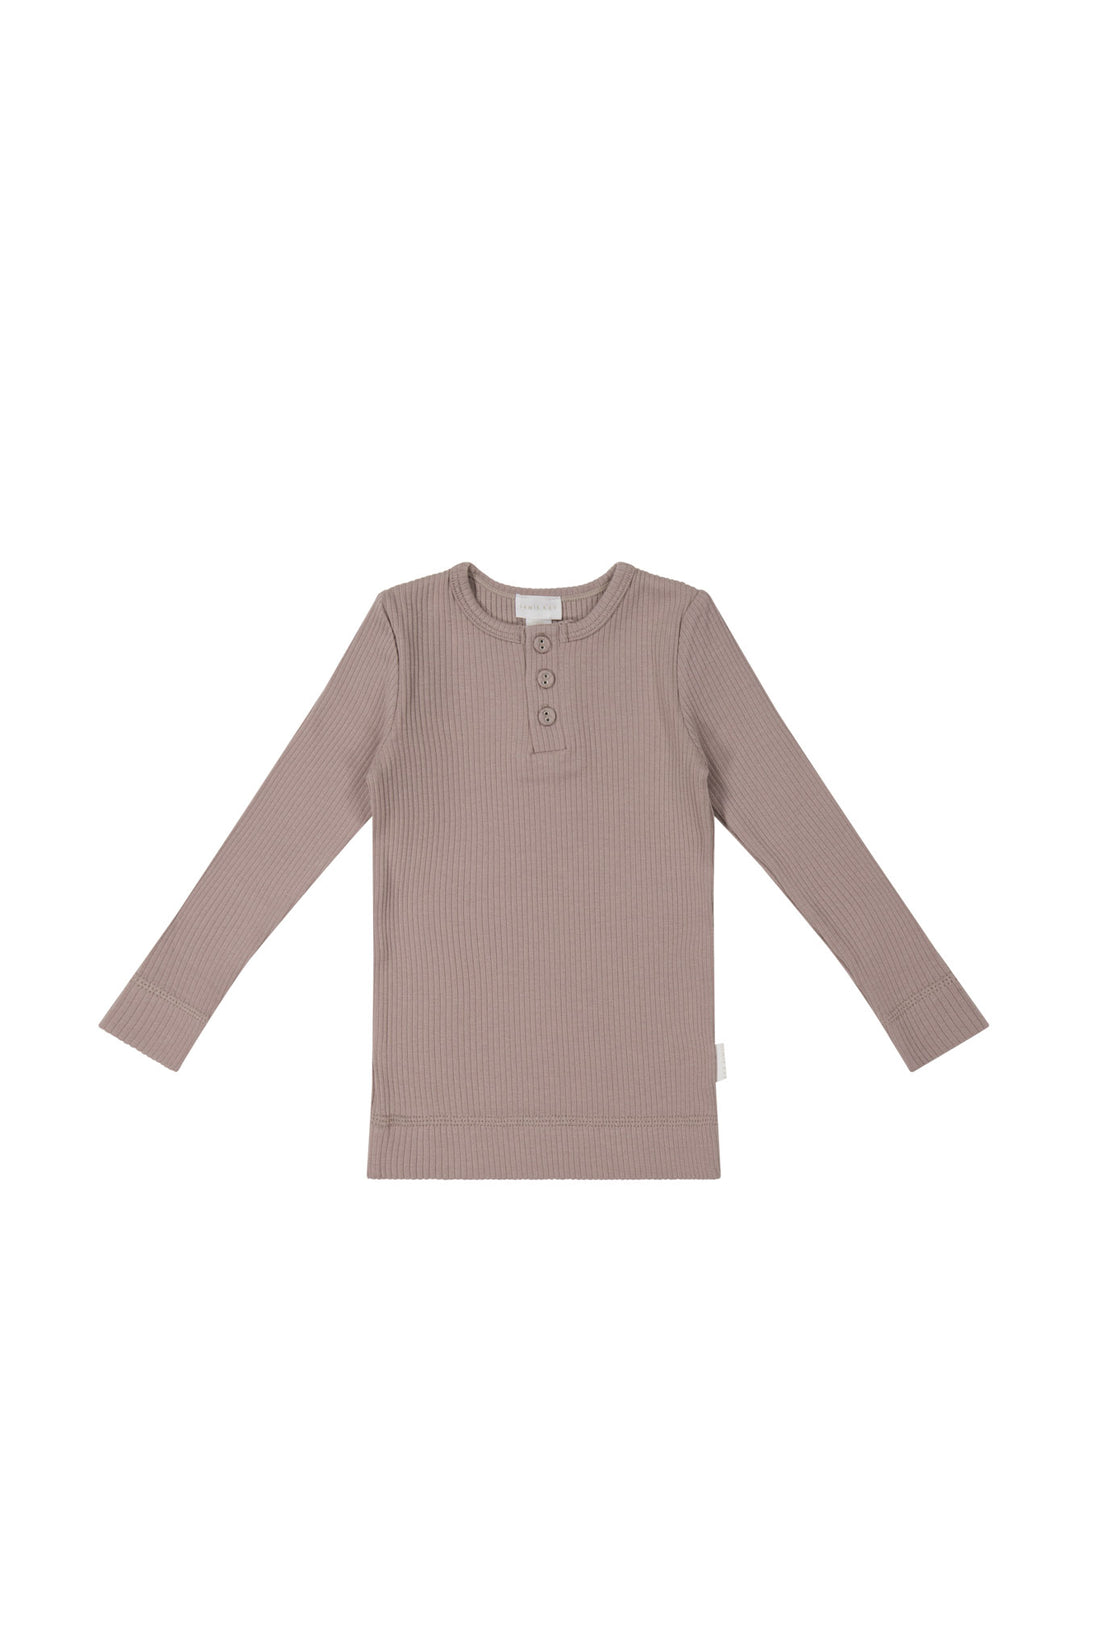 Organic Cotton Modal Long Sleeve Henley - Softest Mauve Childrens Top from Jamie Kay NZ